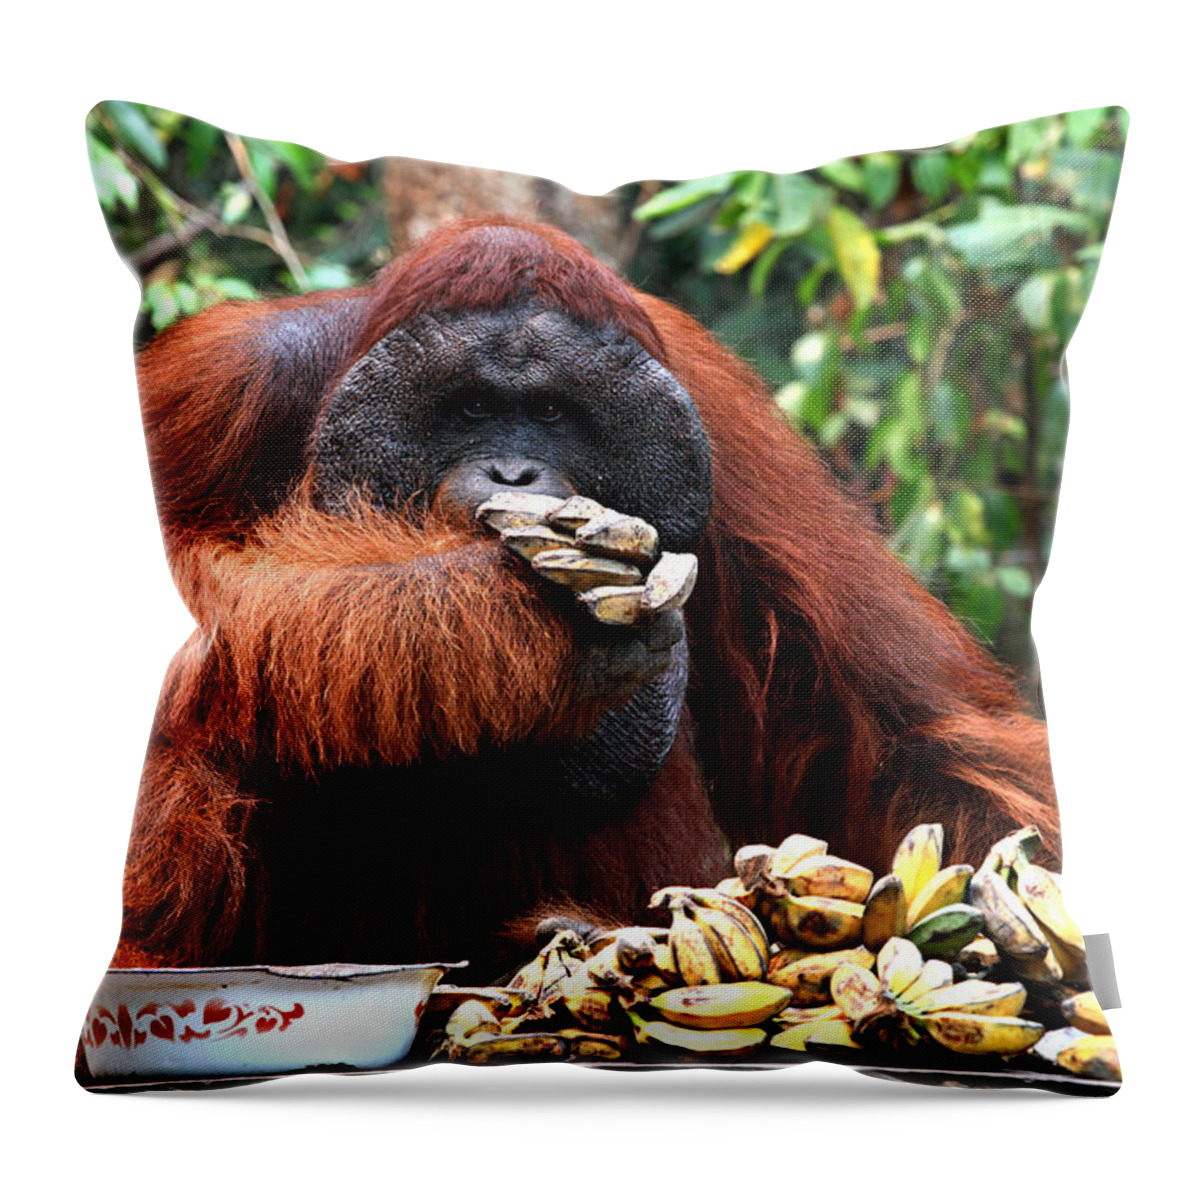  Throw Pillow featuring the photograph Orangutan Feeding Time by Darcy Dietrich